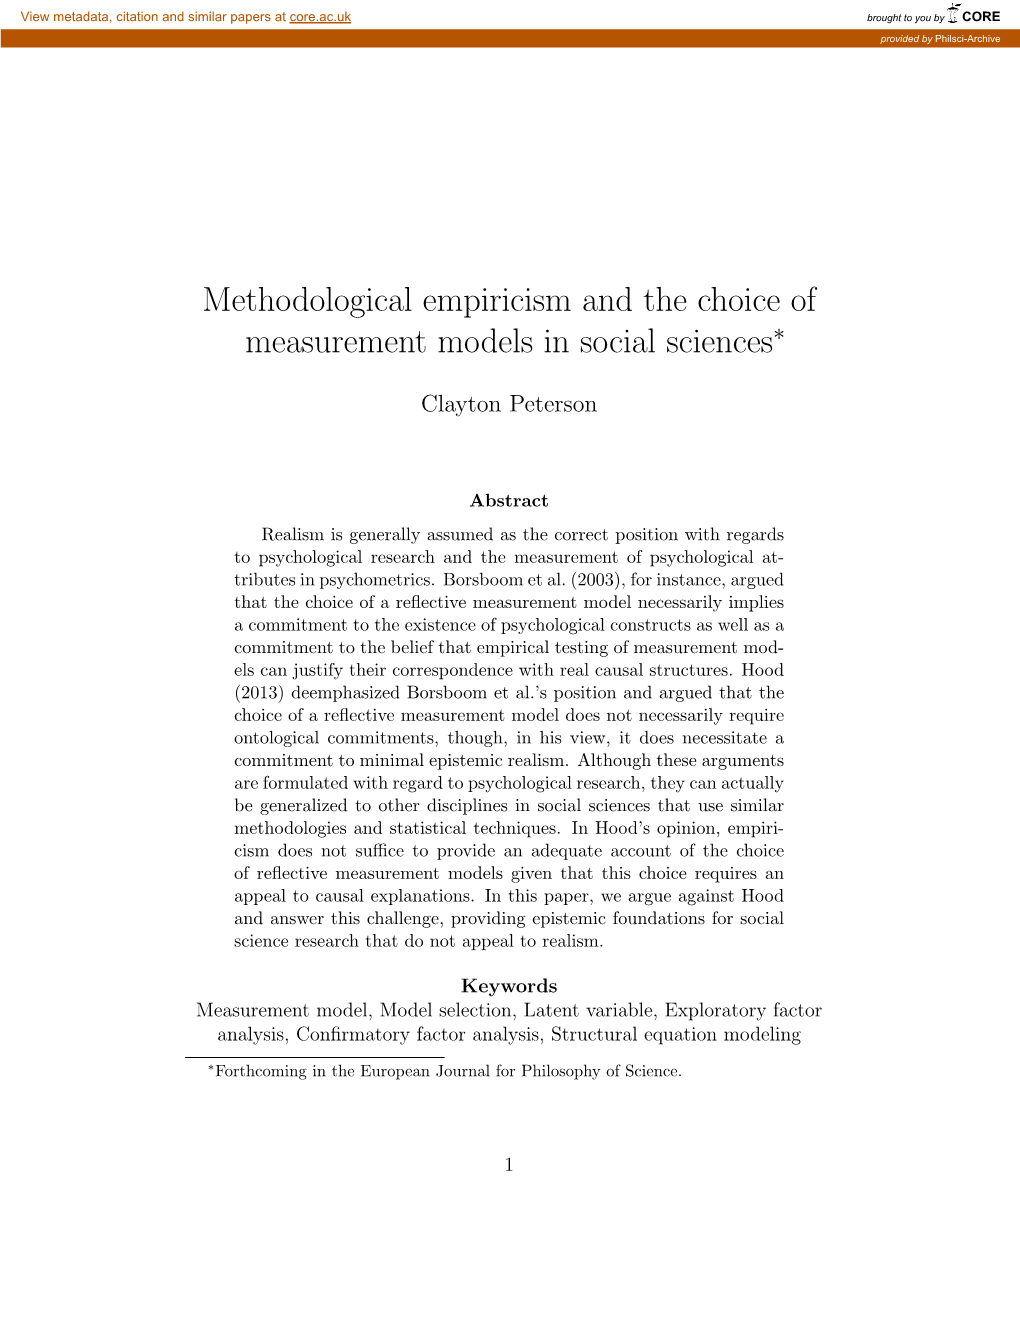 Methodological Empiricism and the Choice of Measurement Models in Social Sciences∗